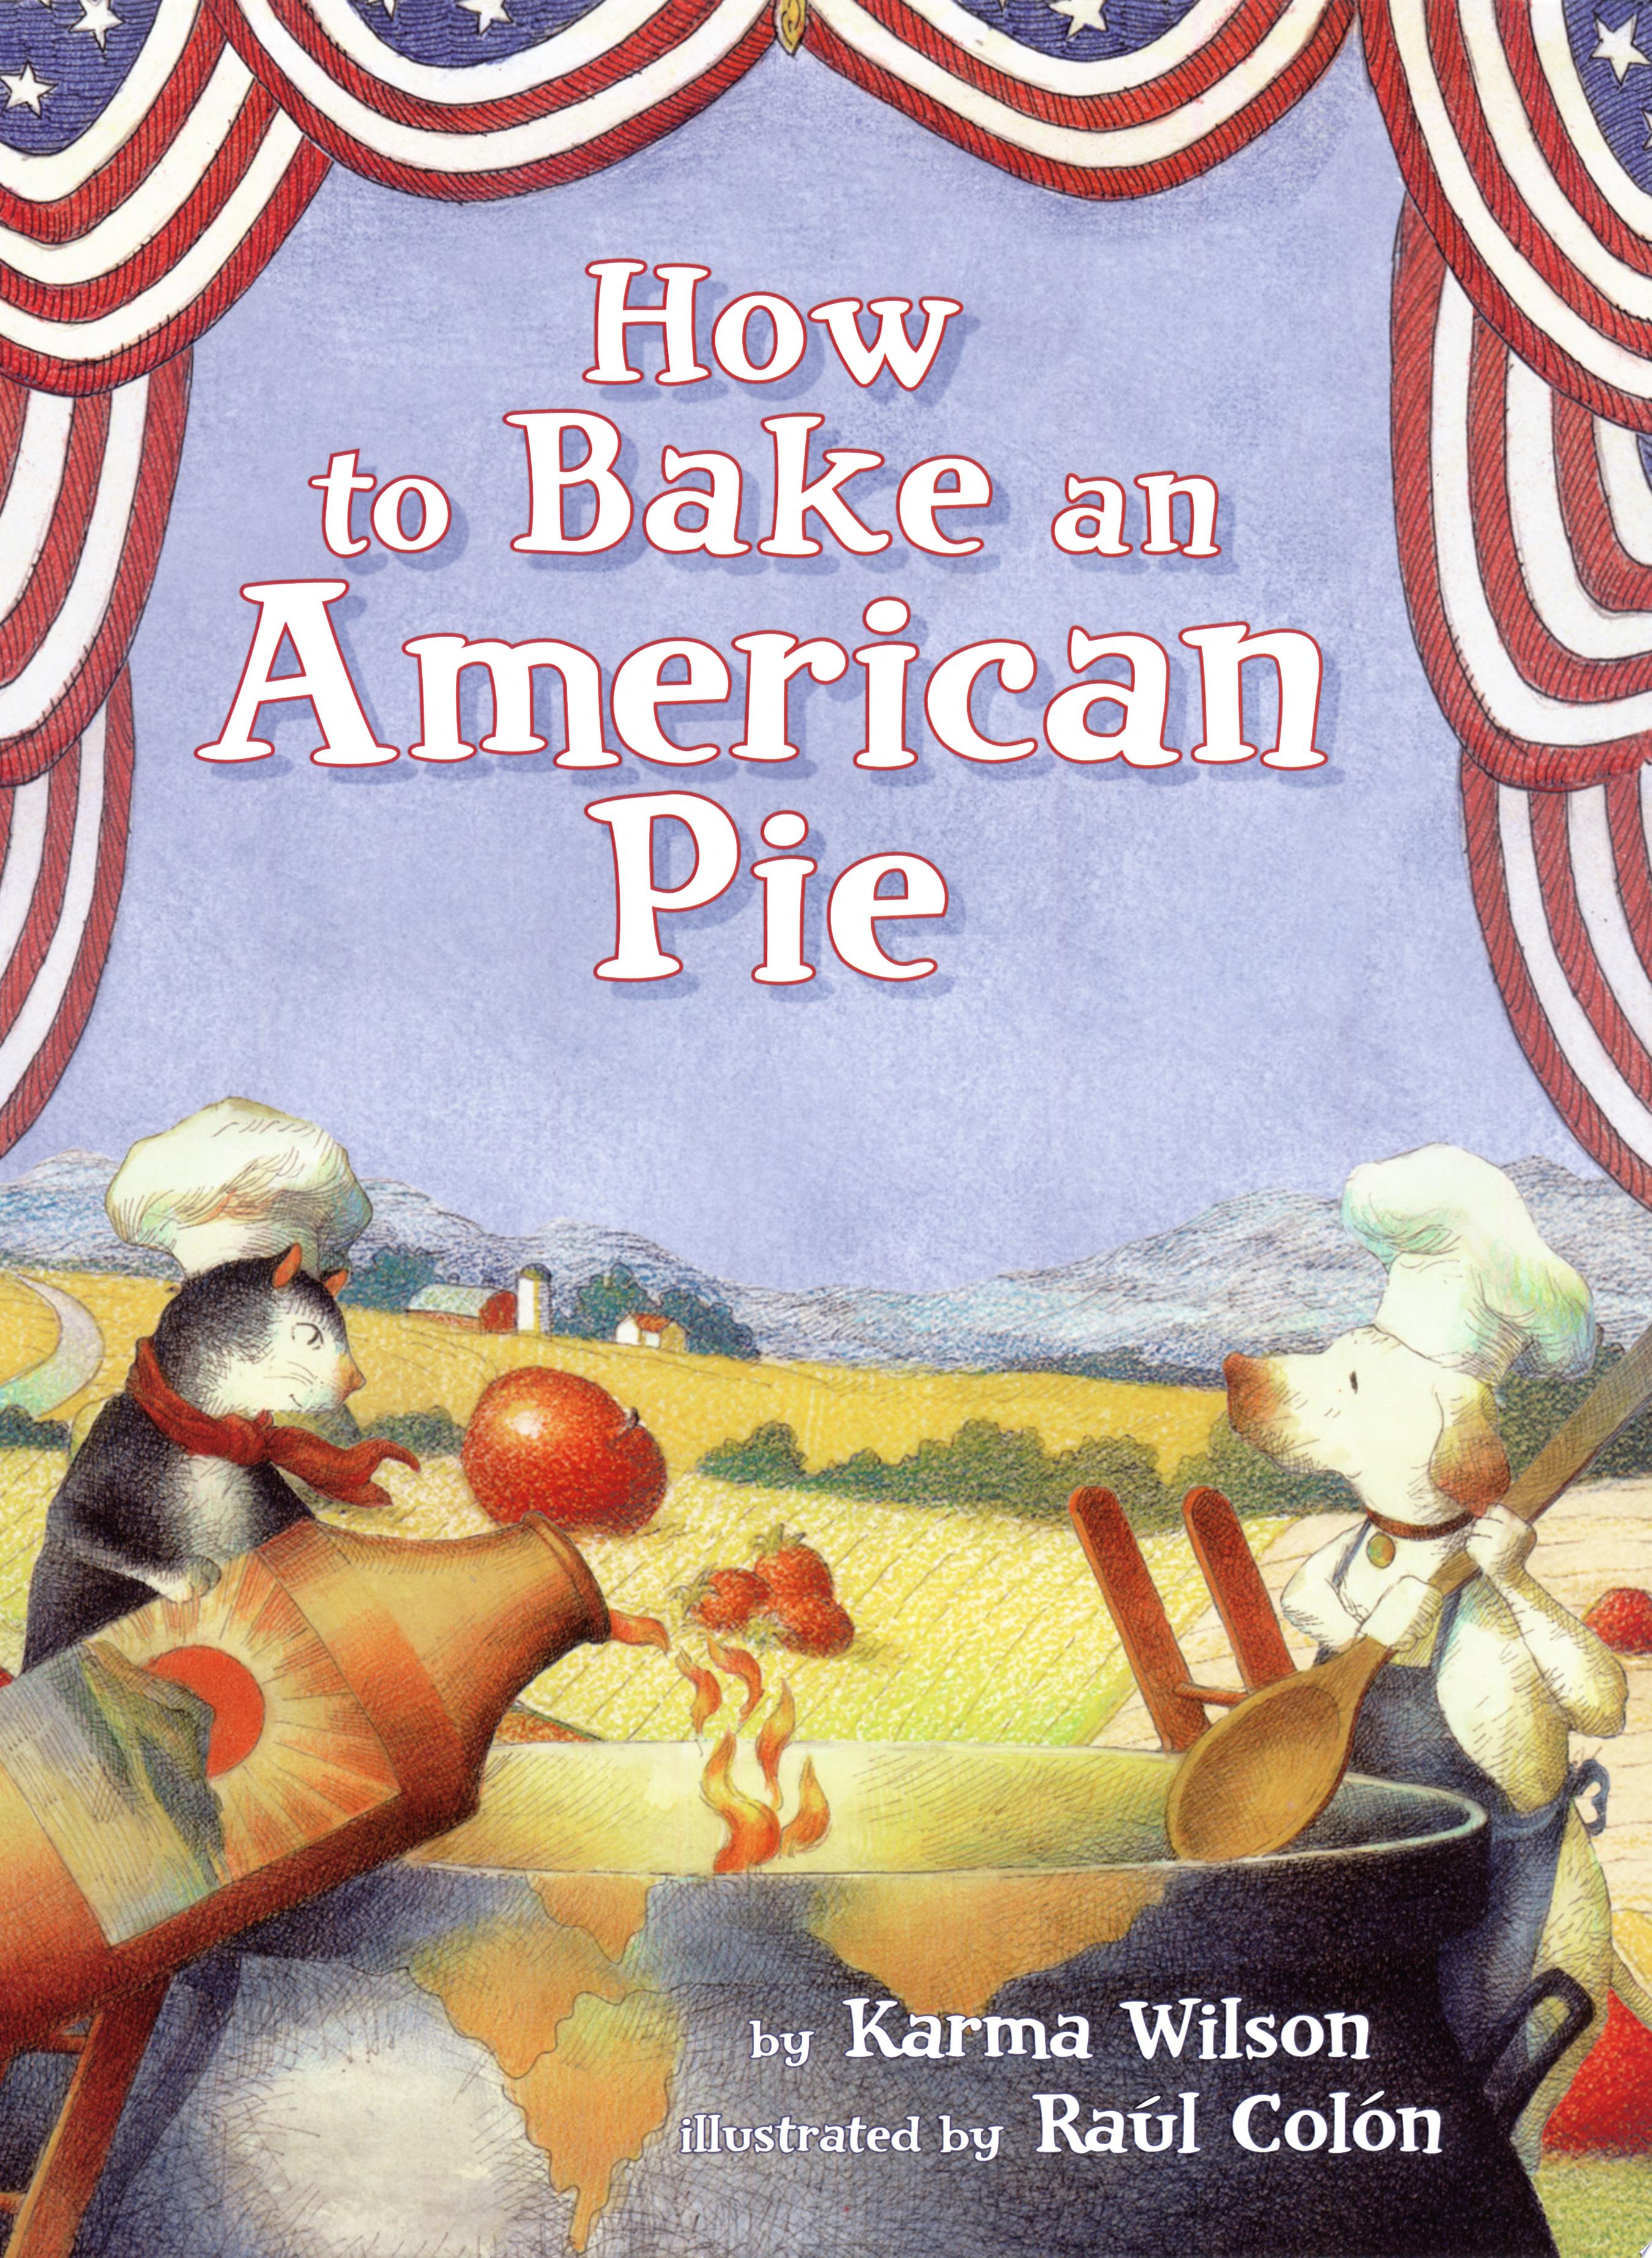 Image for "How to Bake an American Pie"